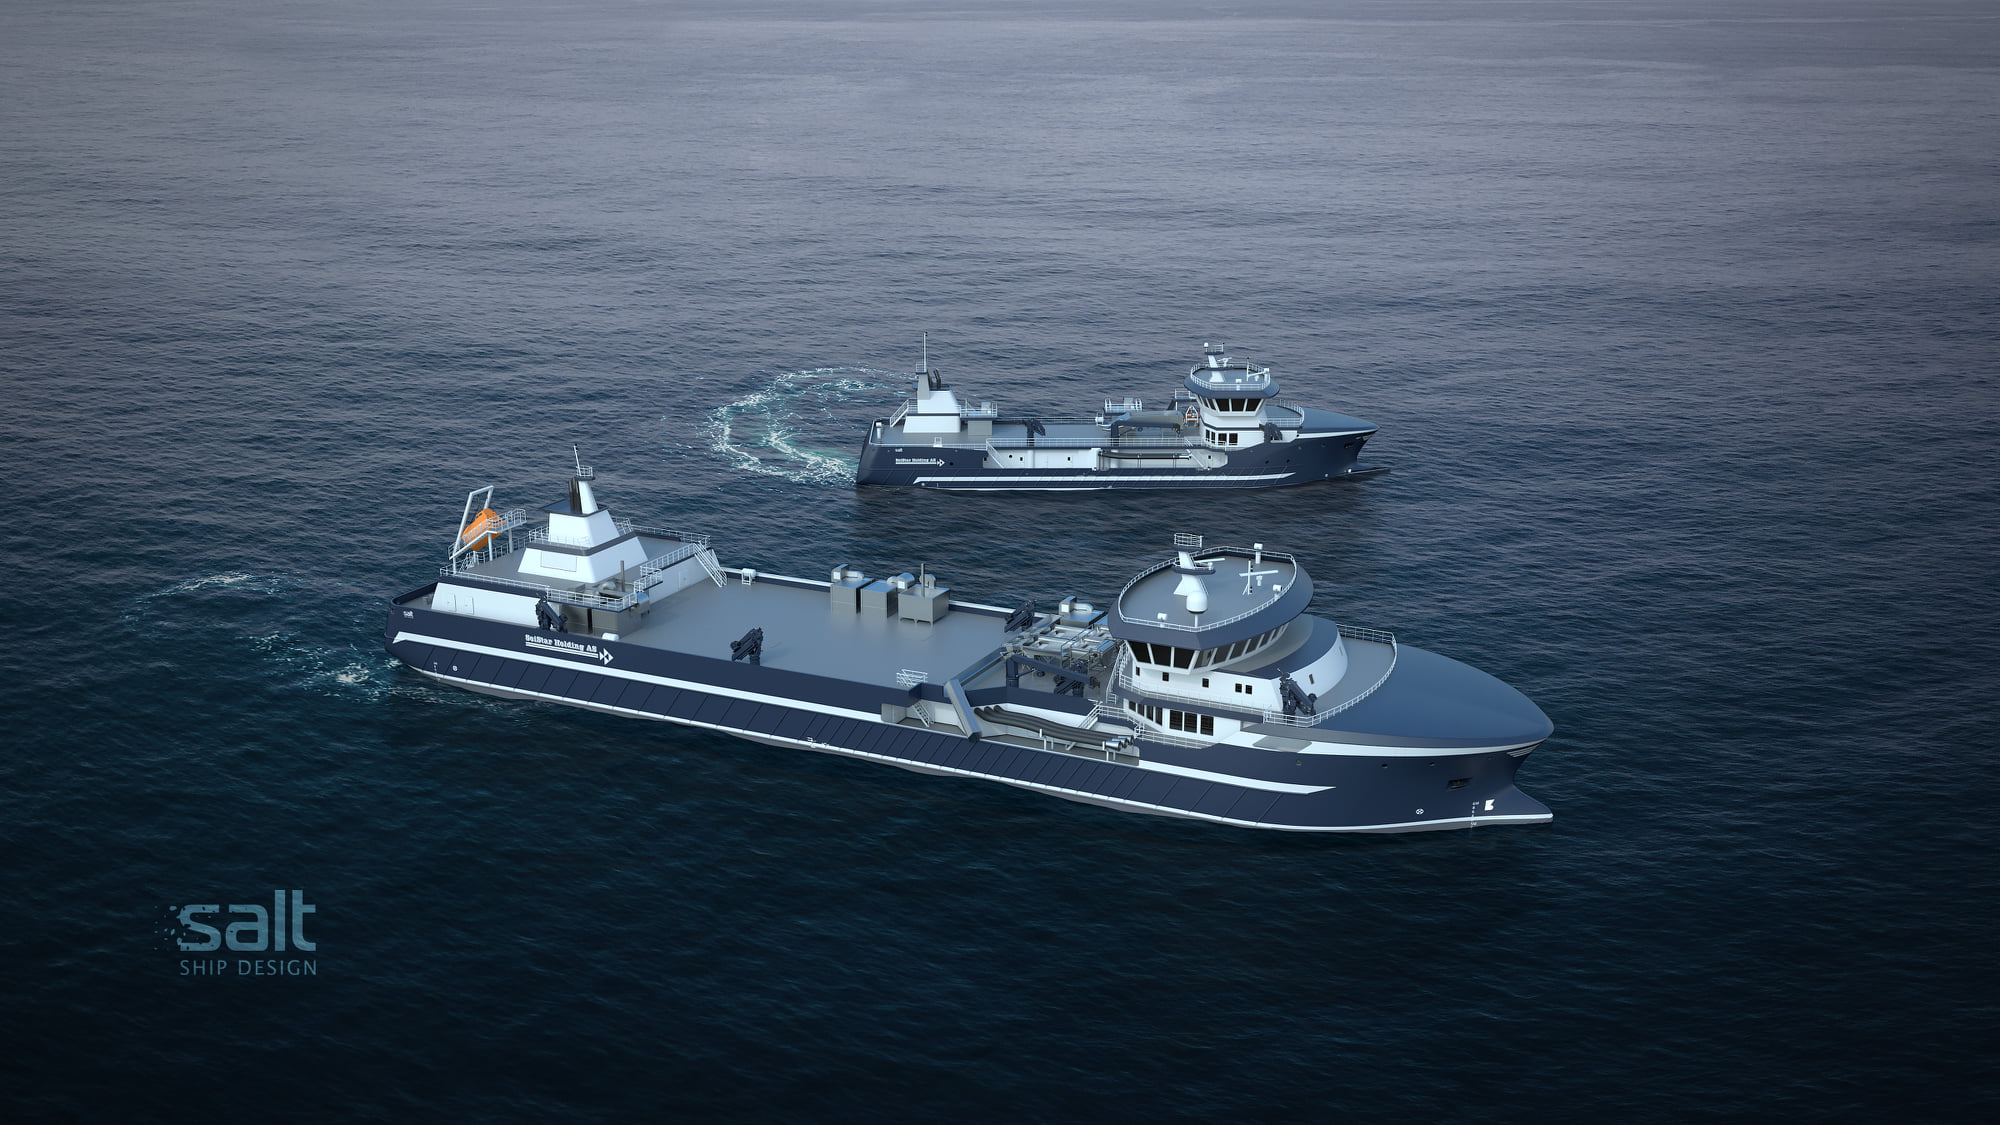 Turkish shipbuilder Cemre receives order for two fish carriers